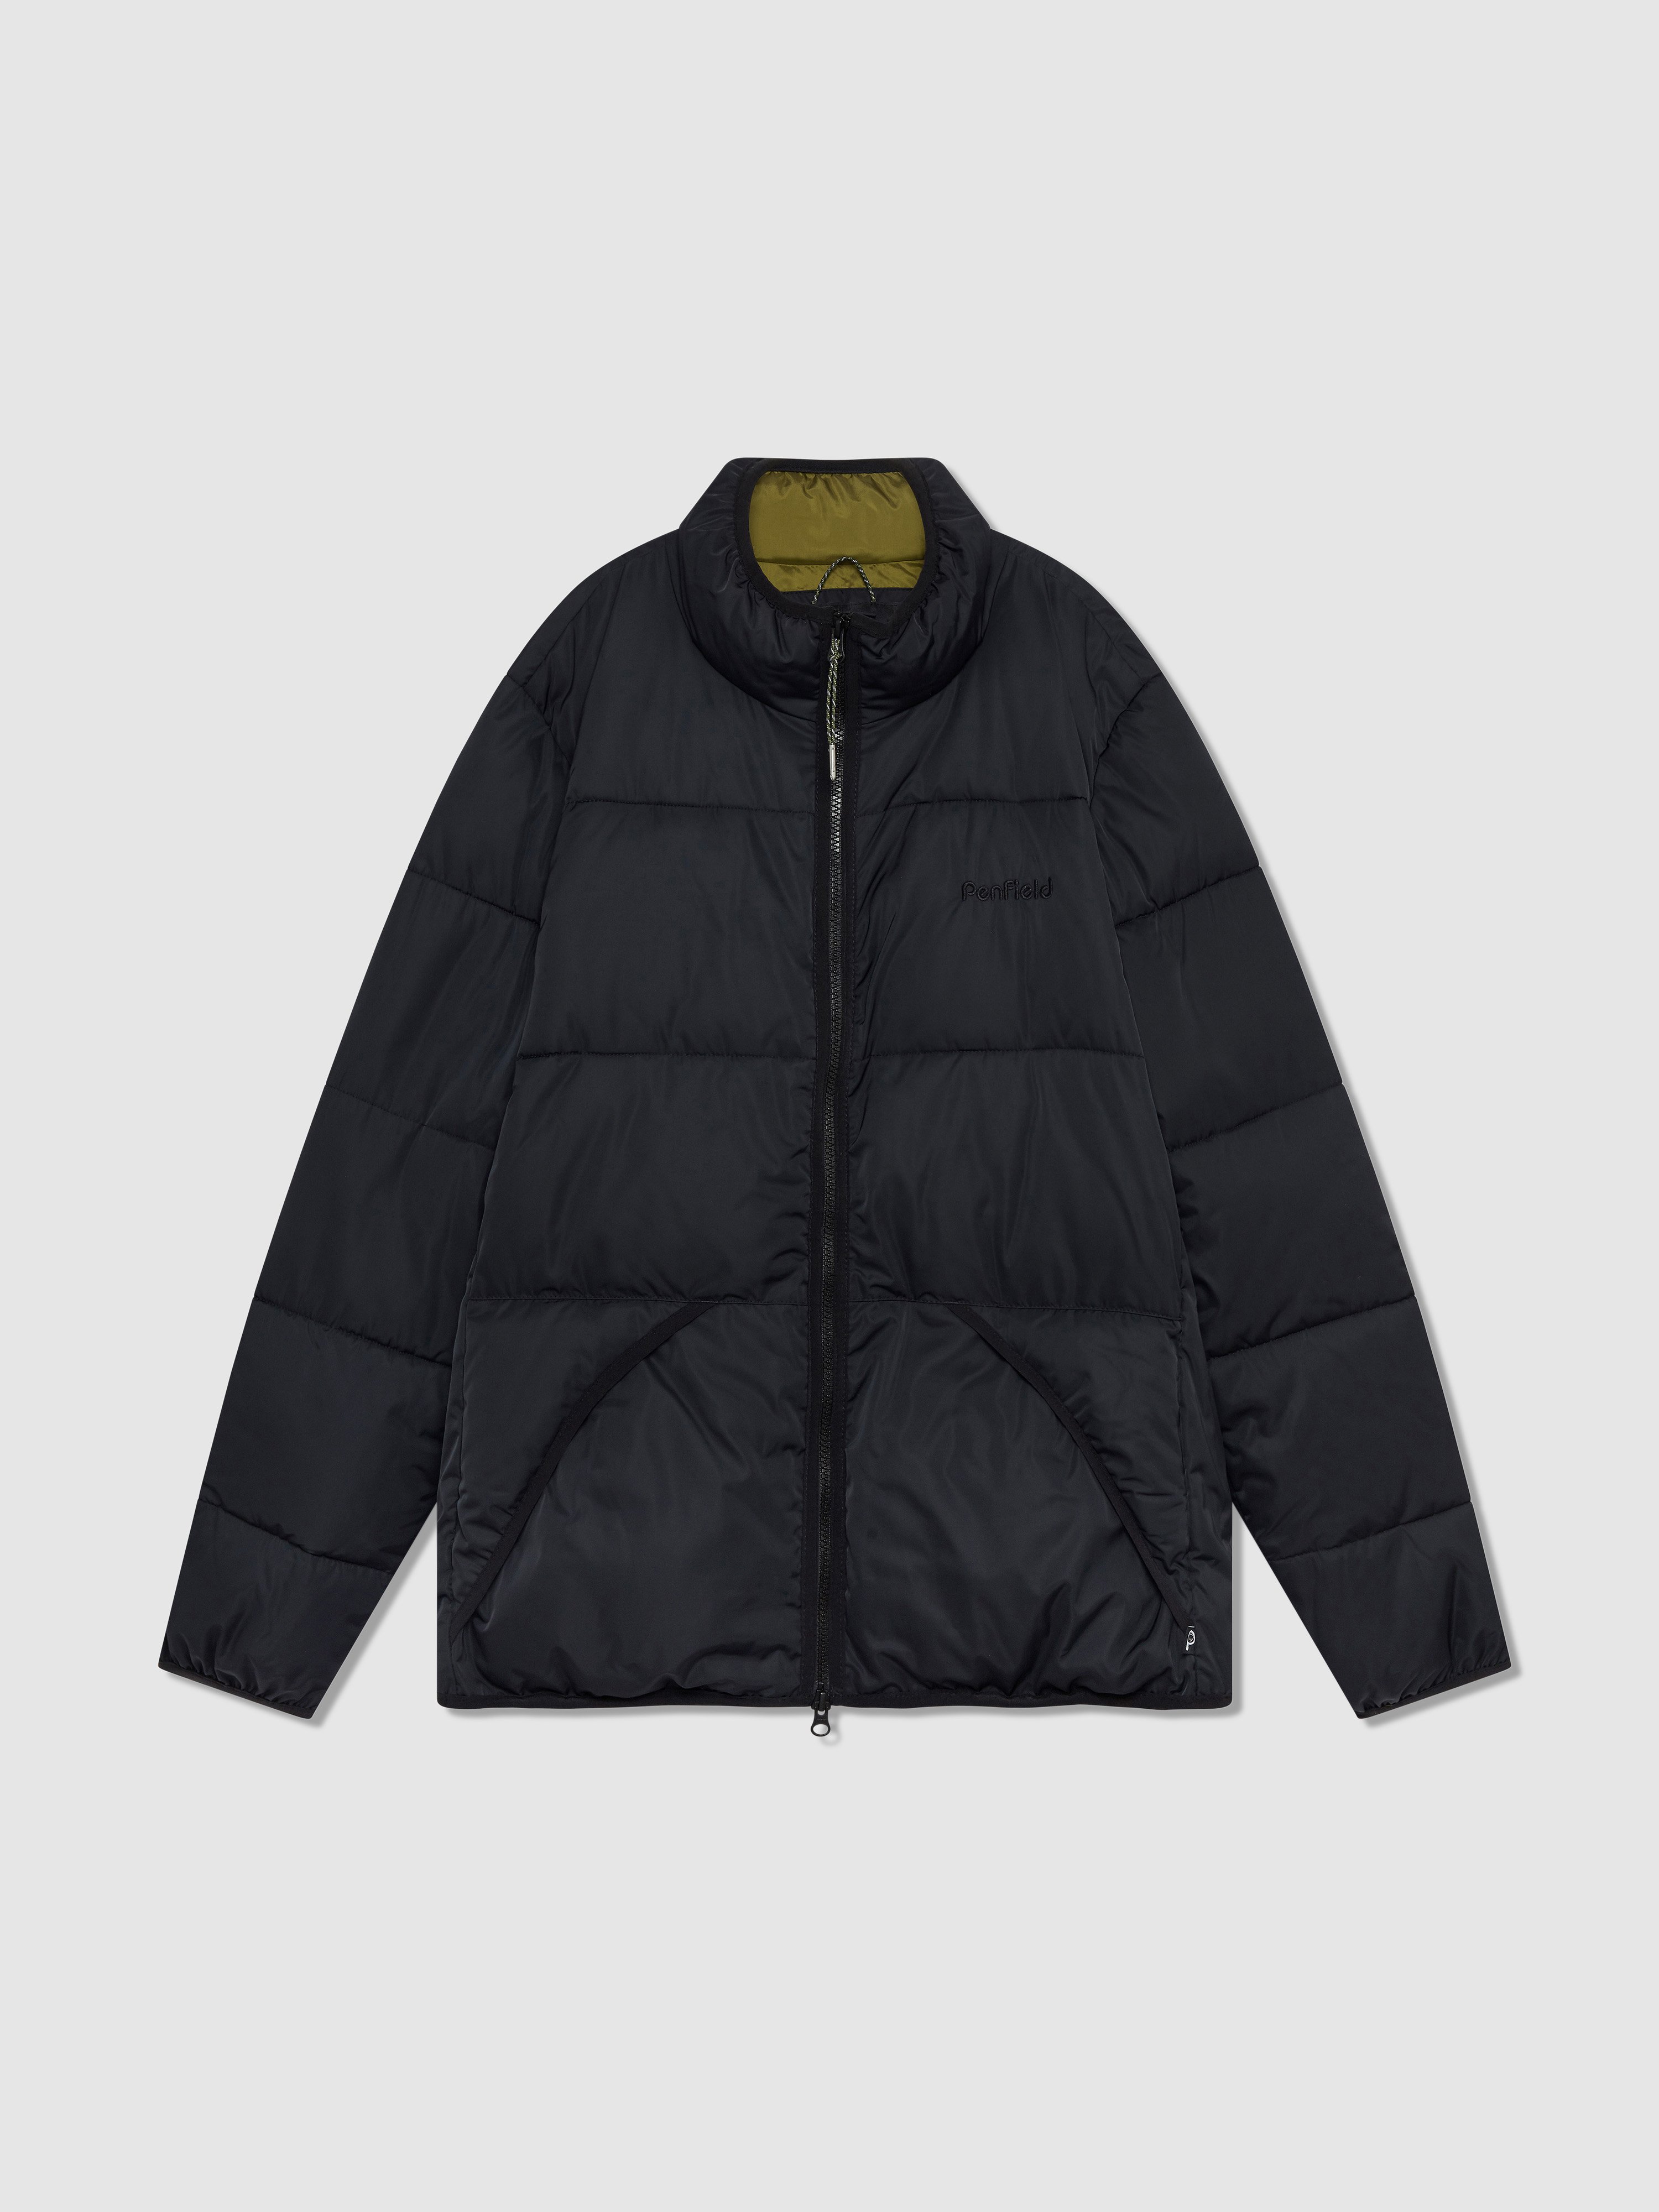 PENFIELD PENFIELD MENS WALKABOUT JACKET